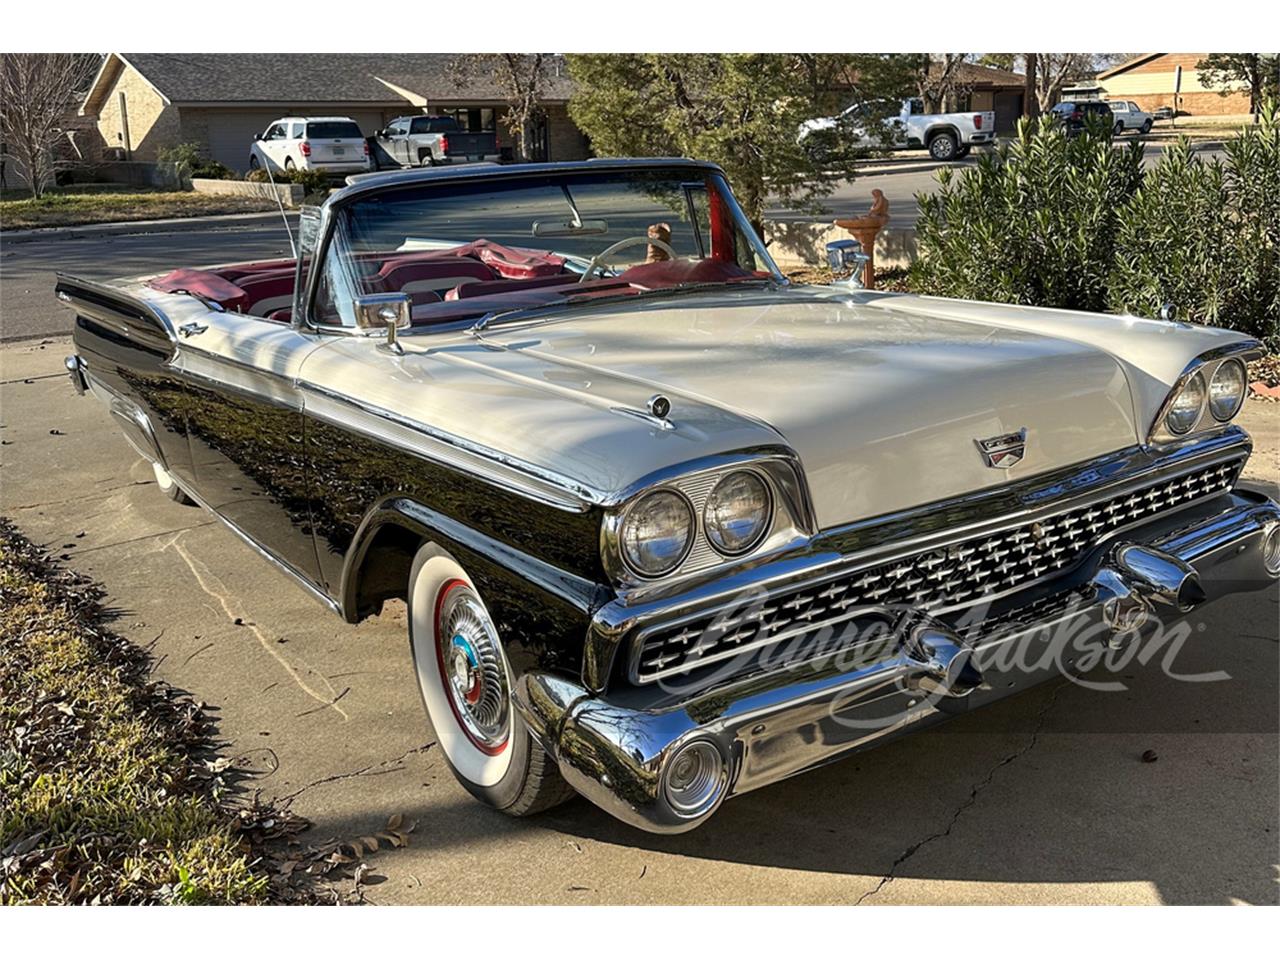 For Sale at Auction: 1959 Ford Galaxie in Scottsdale, Arizona for sale in Scottsdale, AZ